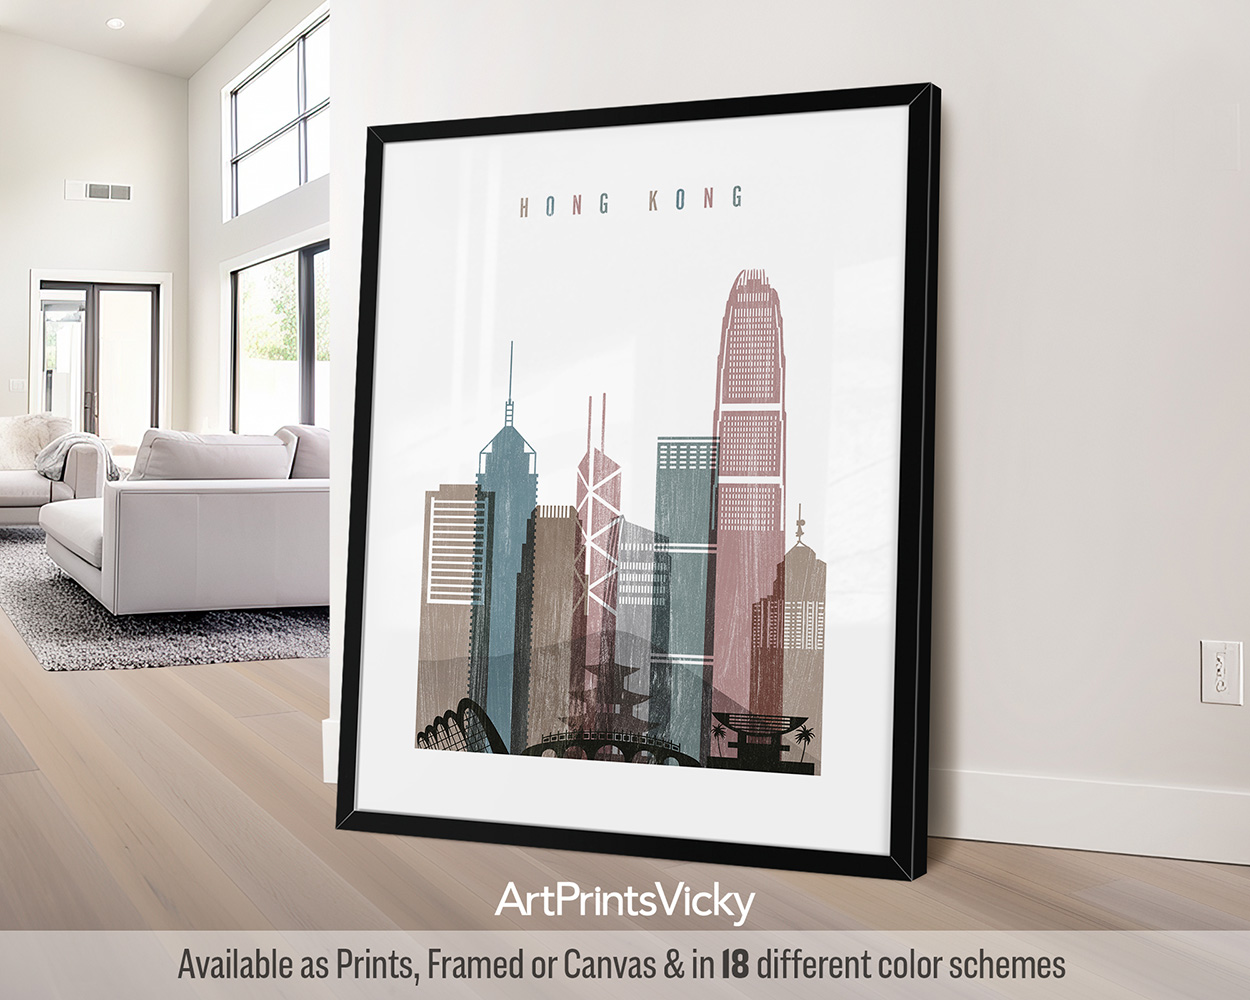 Hong Kong city skyline print featuring iconic skyscrapers, Victoria Harbour, and vibrant cityscape in a textured and modern Distressed 1 style, by ArtPrintsVicky.